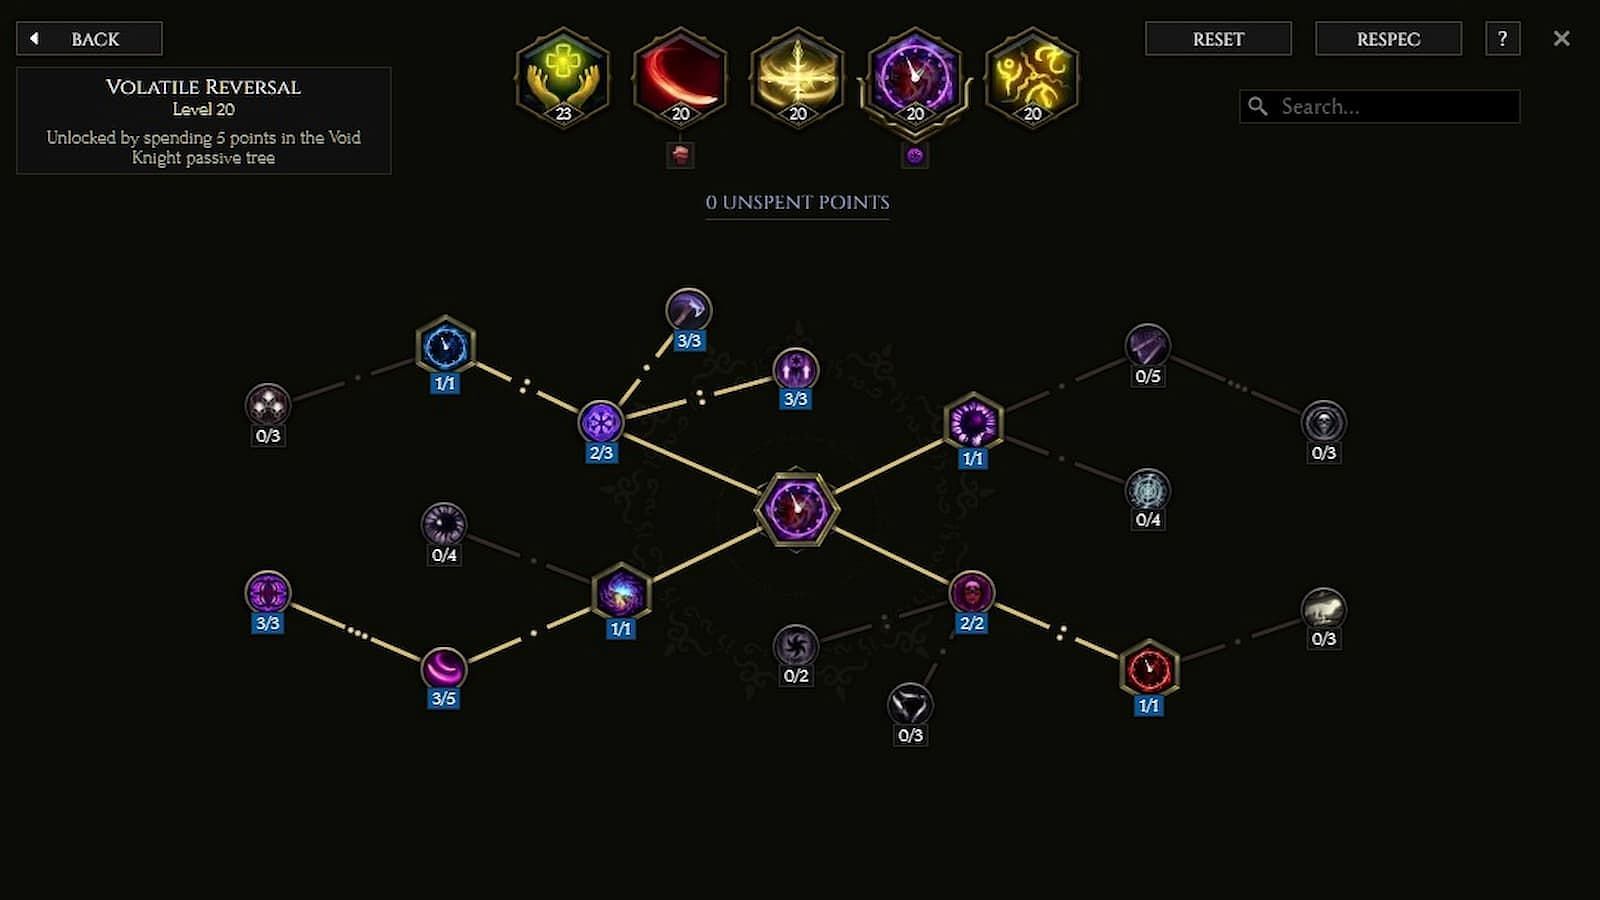 Skill Tree for Umbral Reversal (Image via Last Epoch Tools/Eleventh Hour Games)